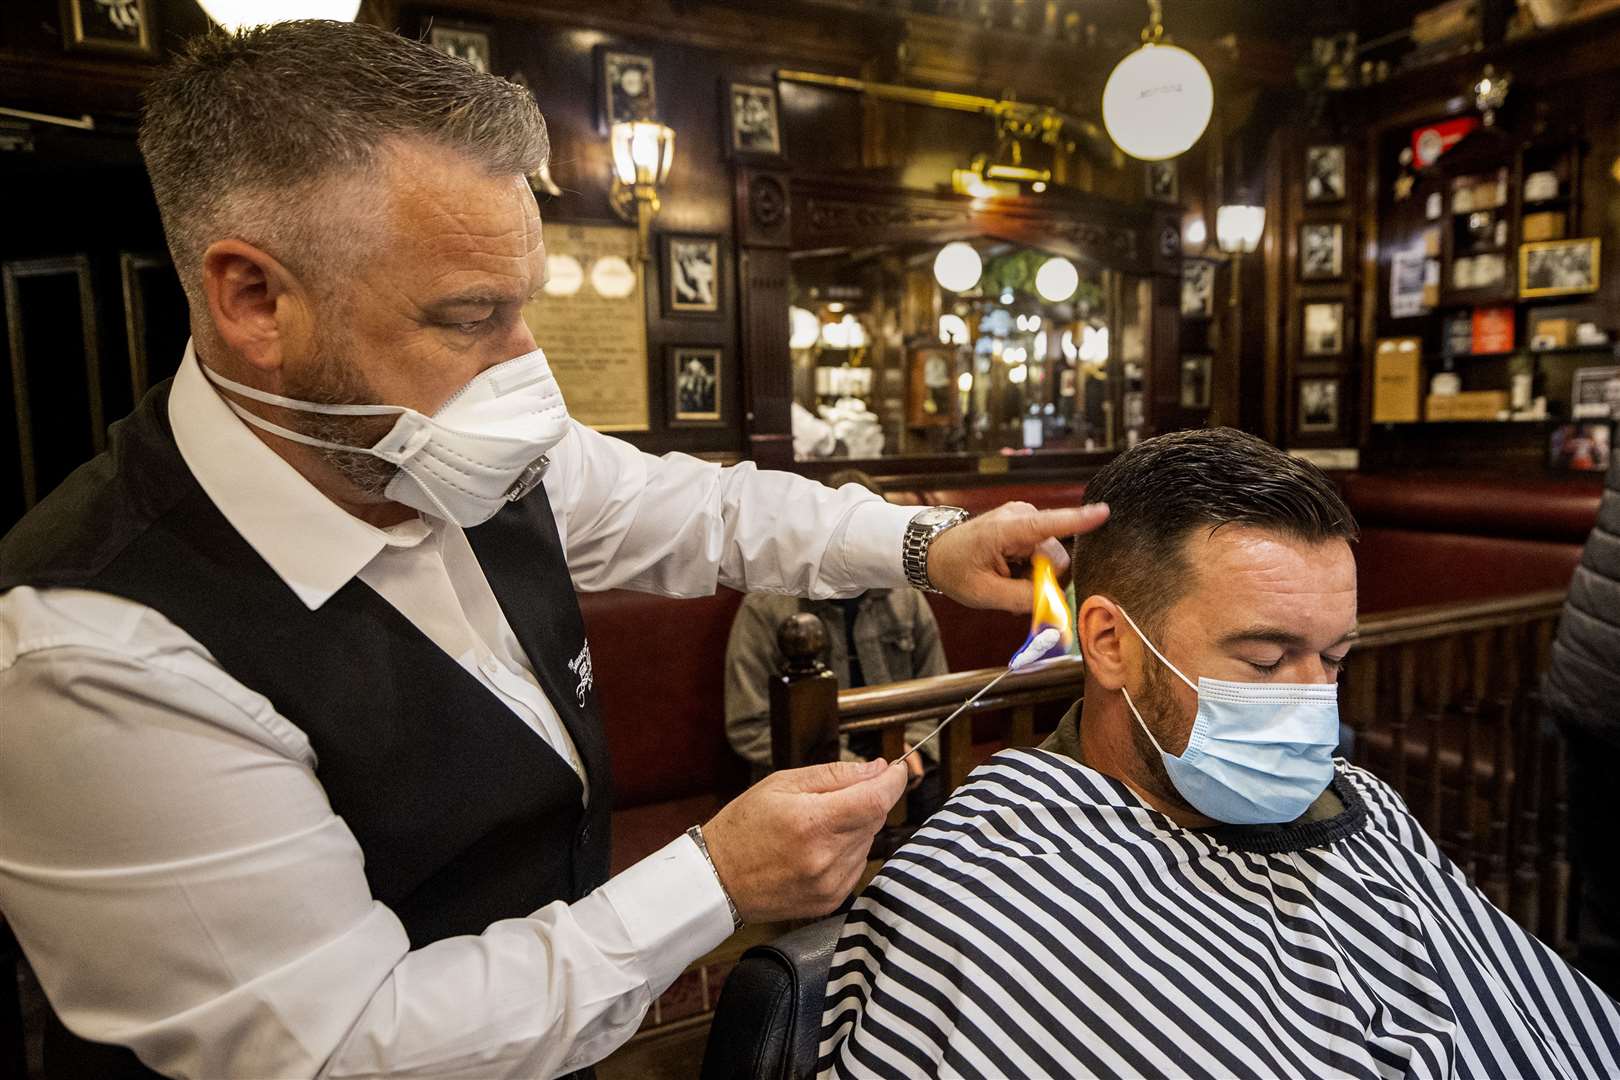 Sean Lawlor (left) singeing the hair of Damian Gilvary (right) during a haircut at Cambridge Barbershop on Belfast’s Lisburn Road. (Liam McBurney/PA)